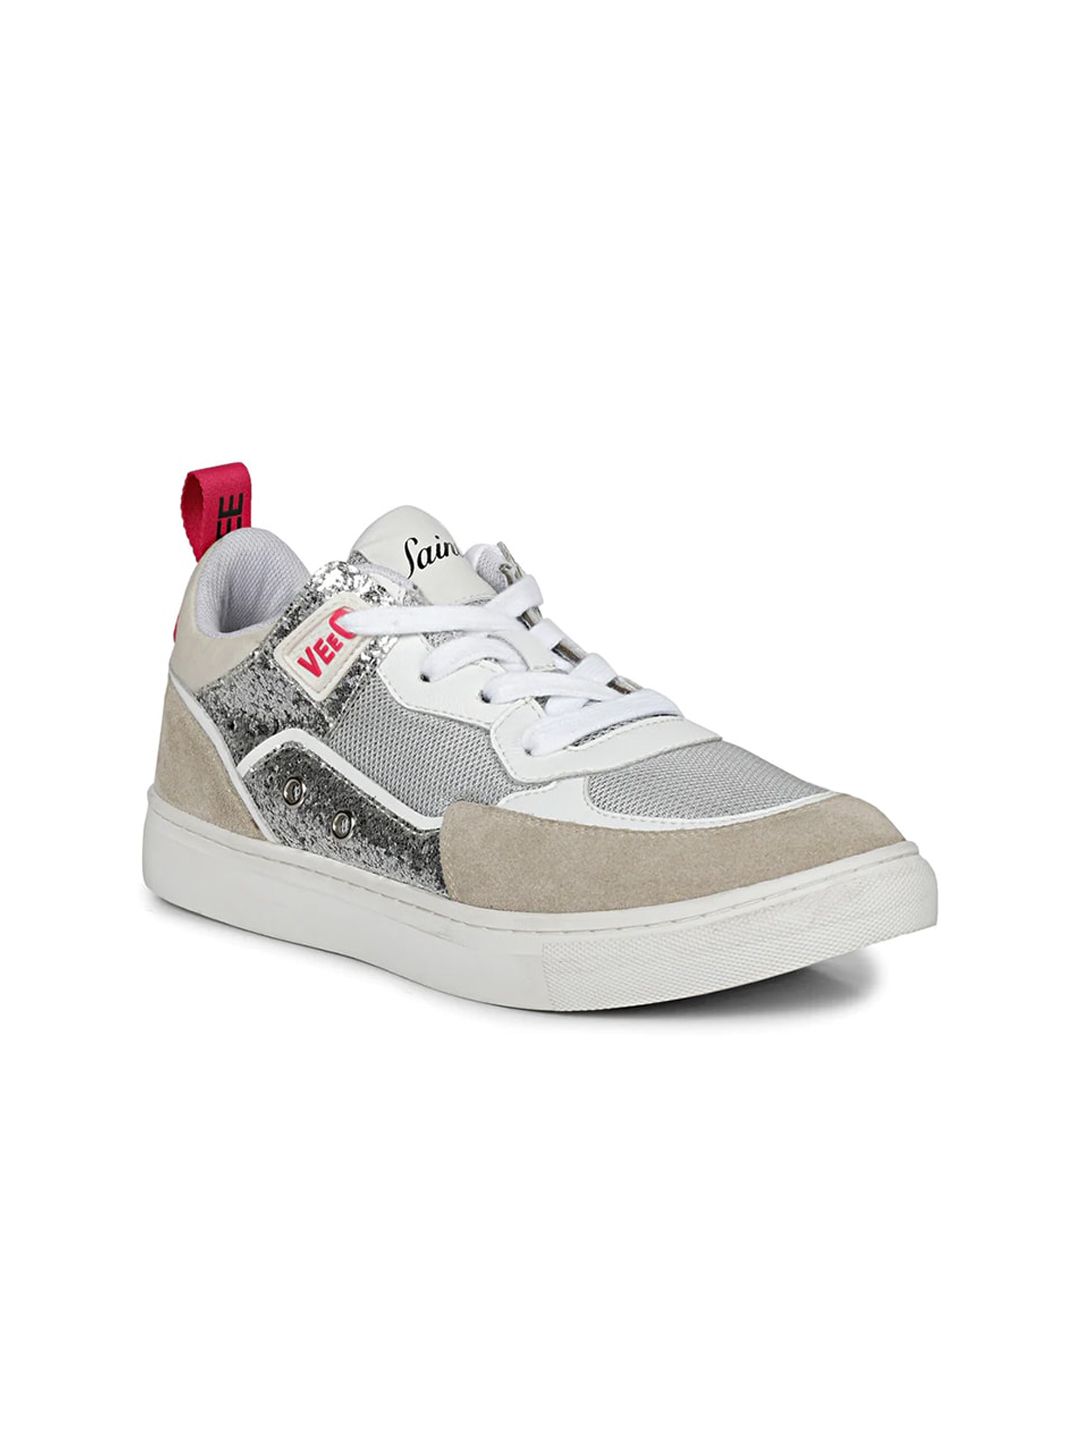 Saint G Women Shimmery Leather Sneakers Price in India